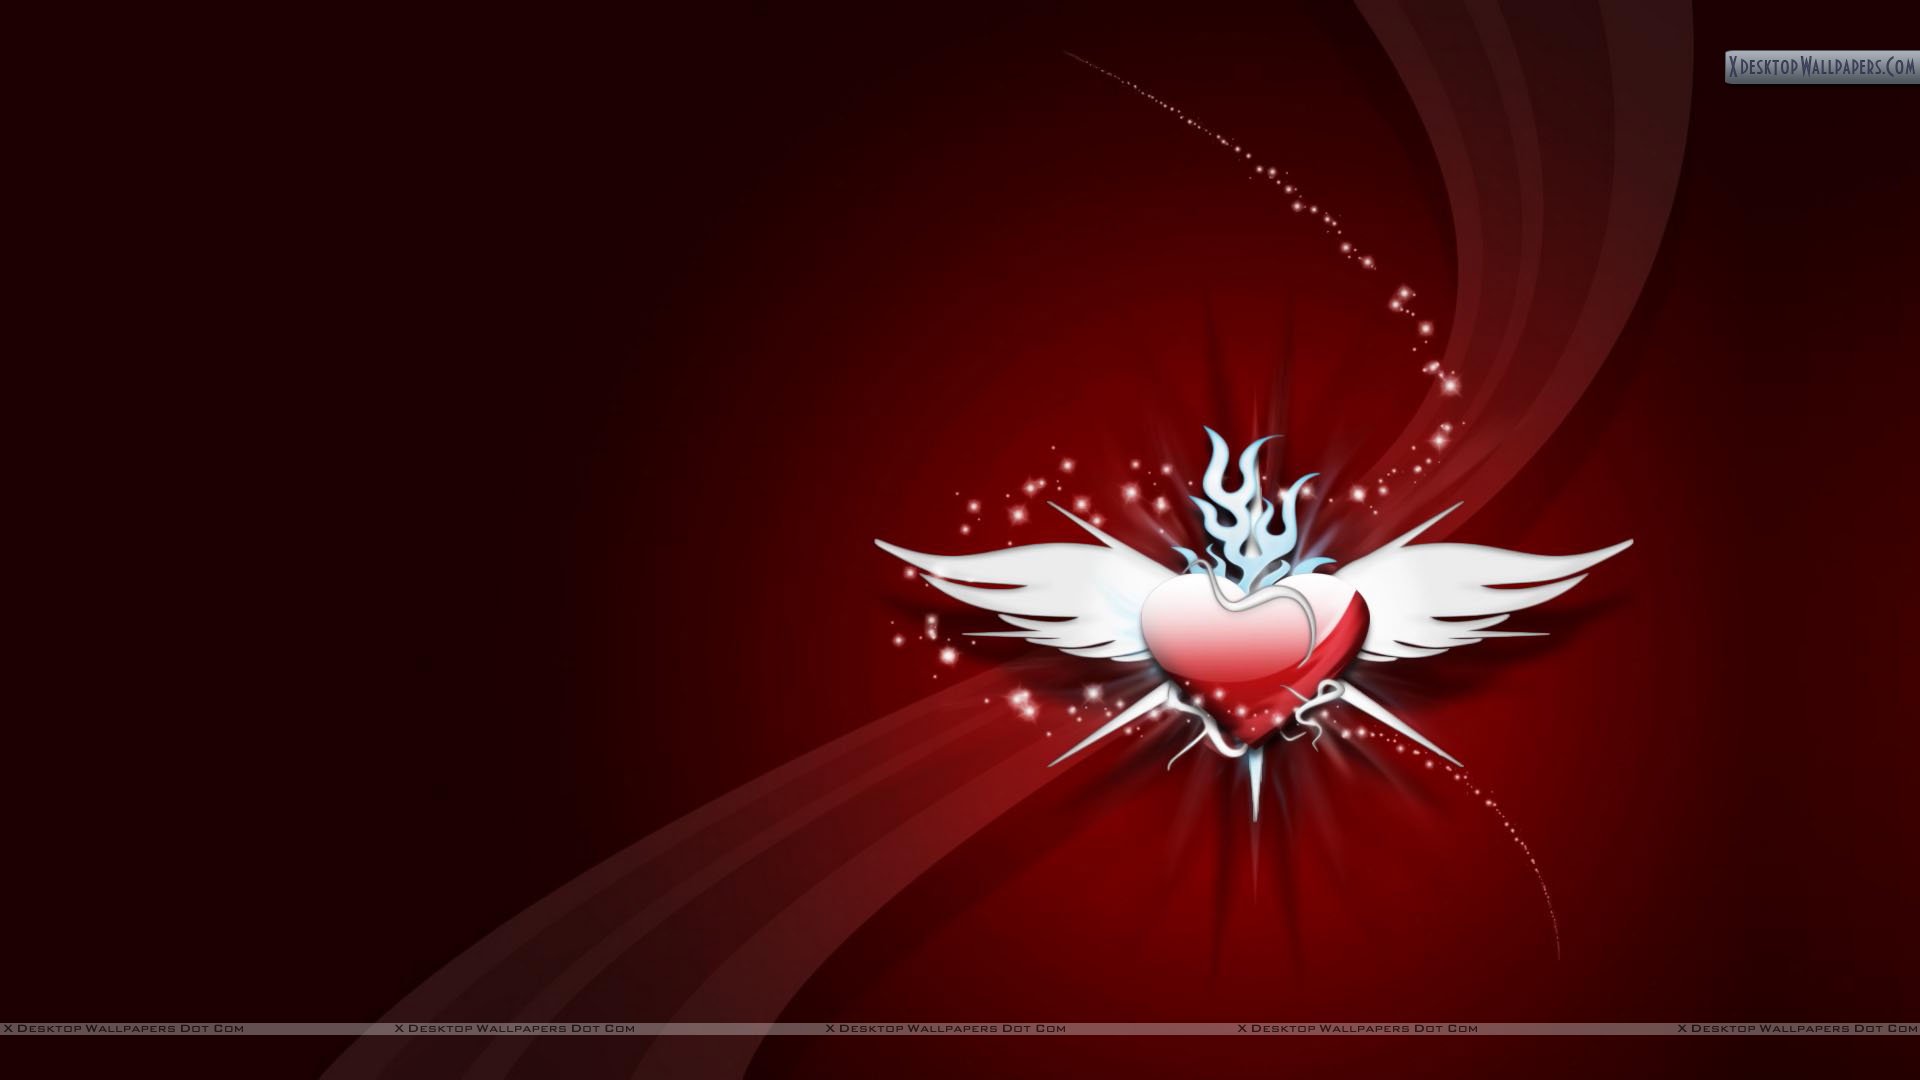 Red Heart With White Wings Cool Wallpaper Jpg